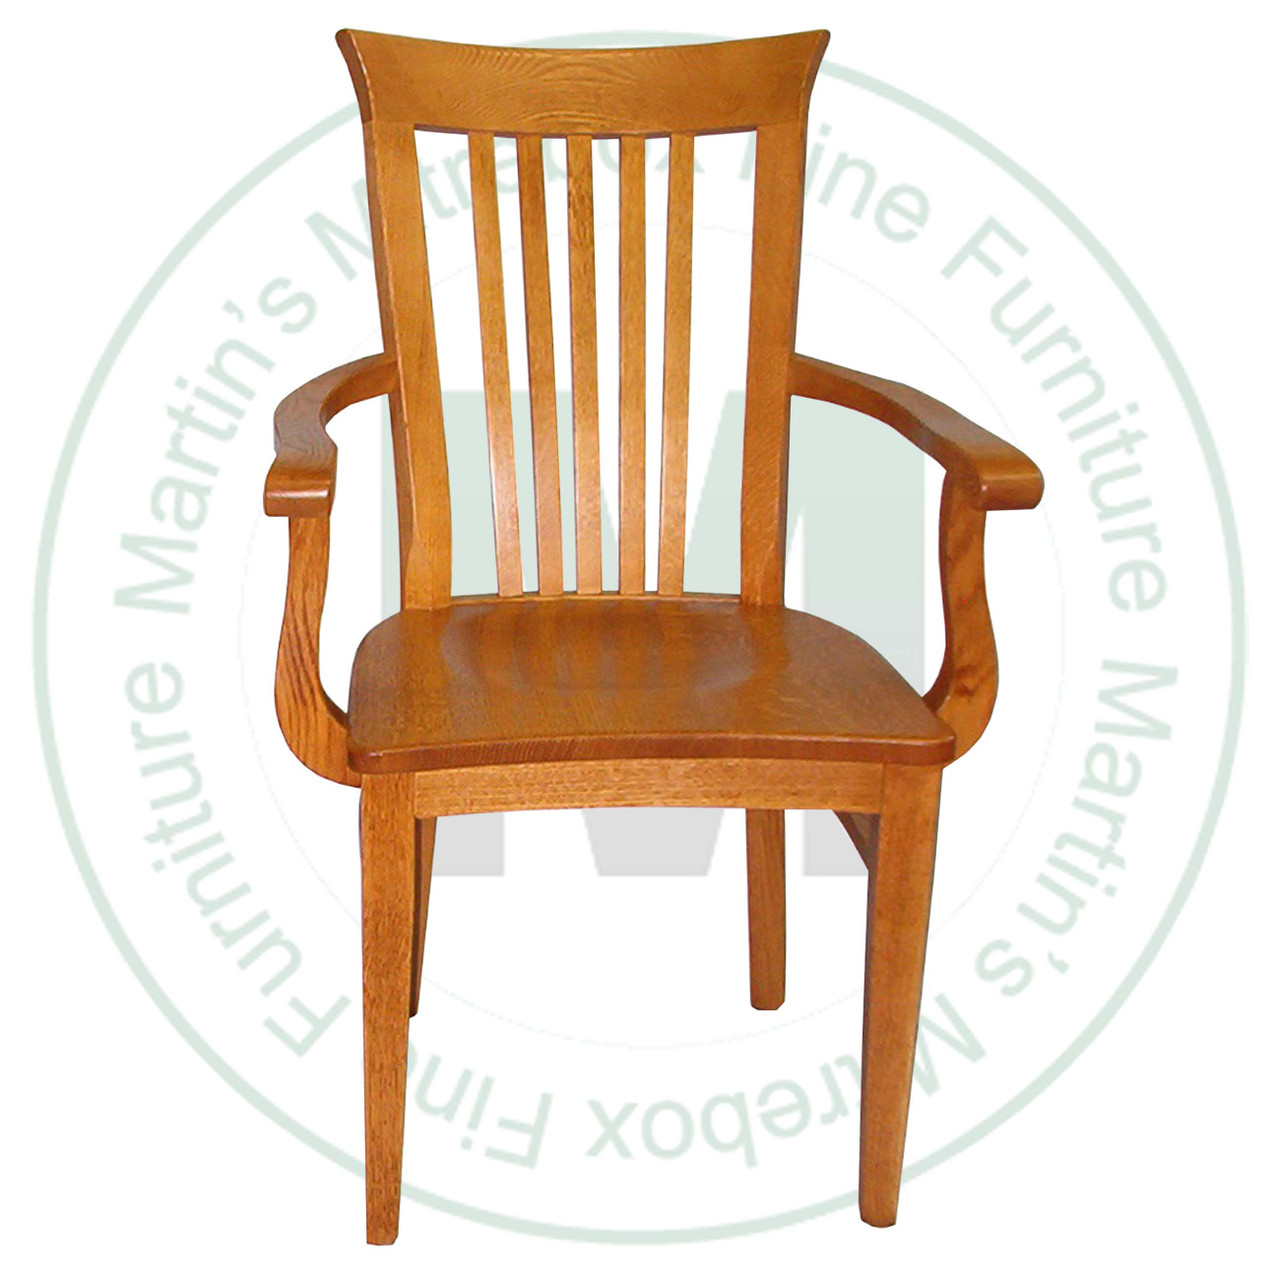 Maple Athena Arm Chair Has Wood Seat